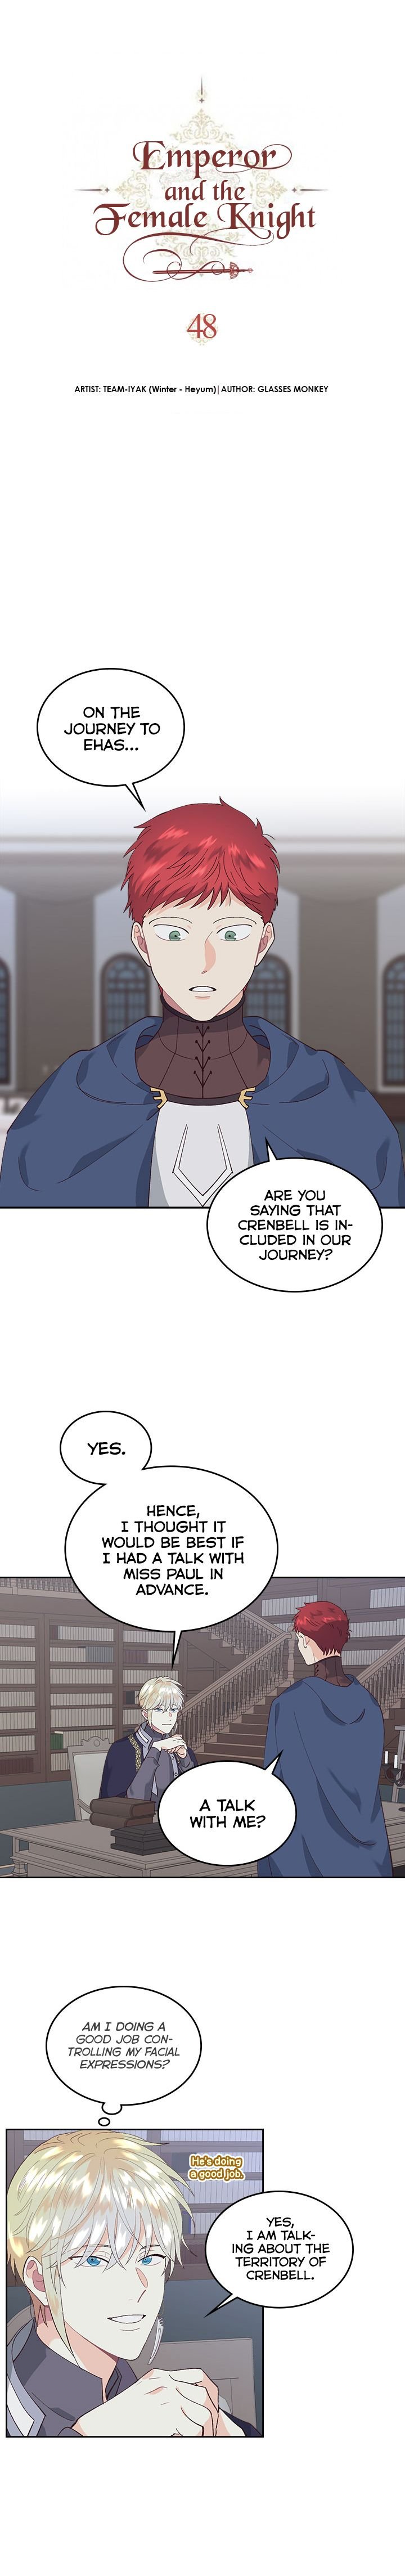 emperor-and-the-female-knight-chap-48-5